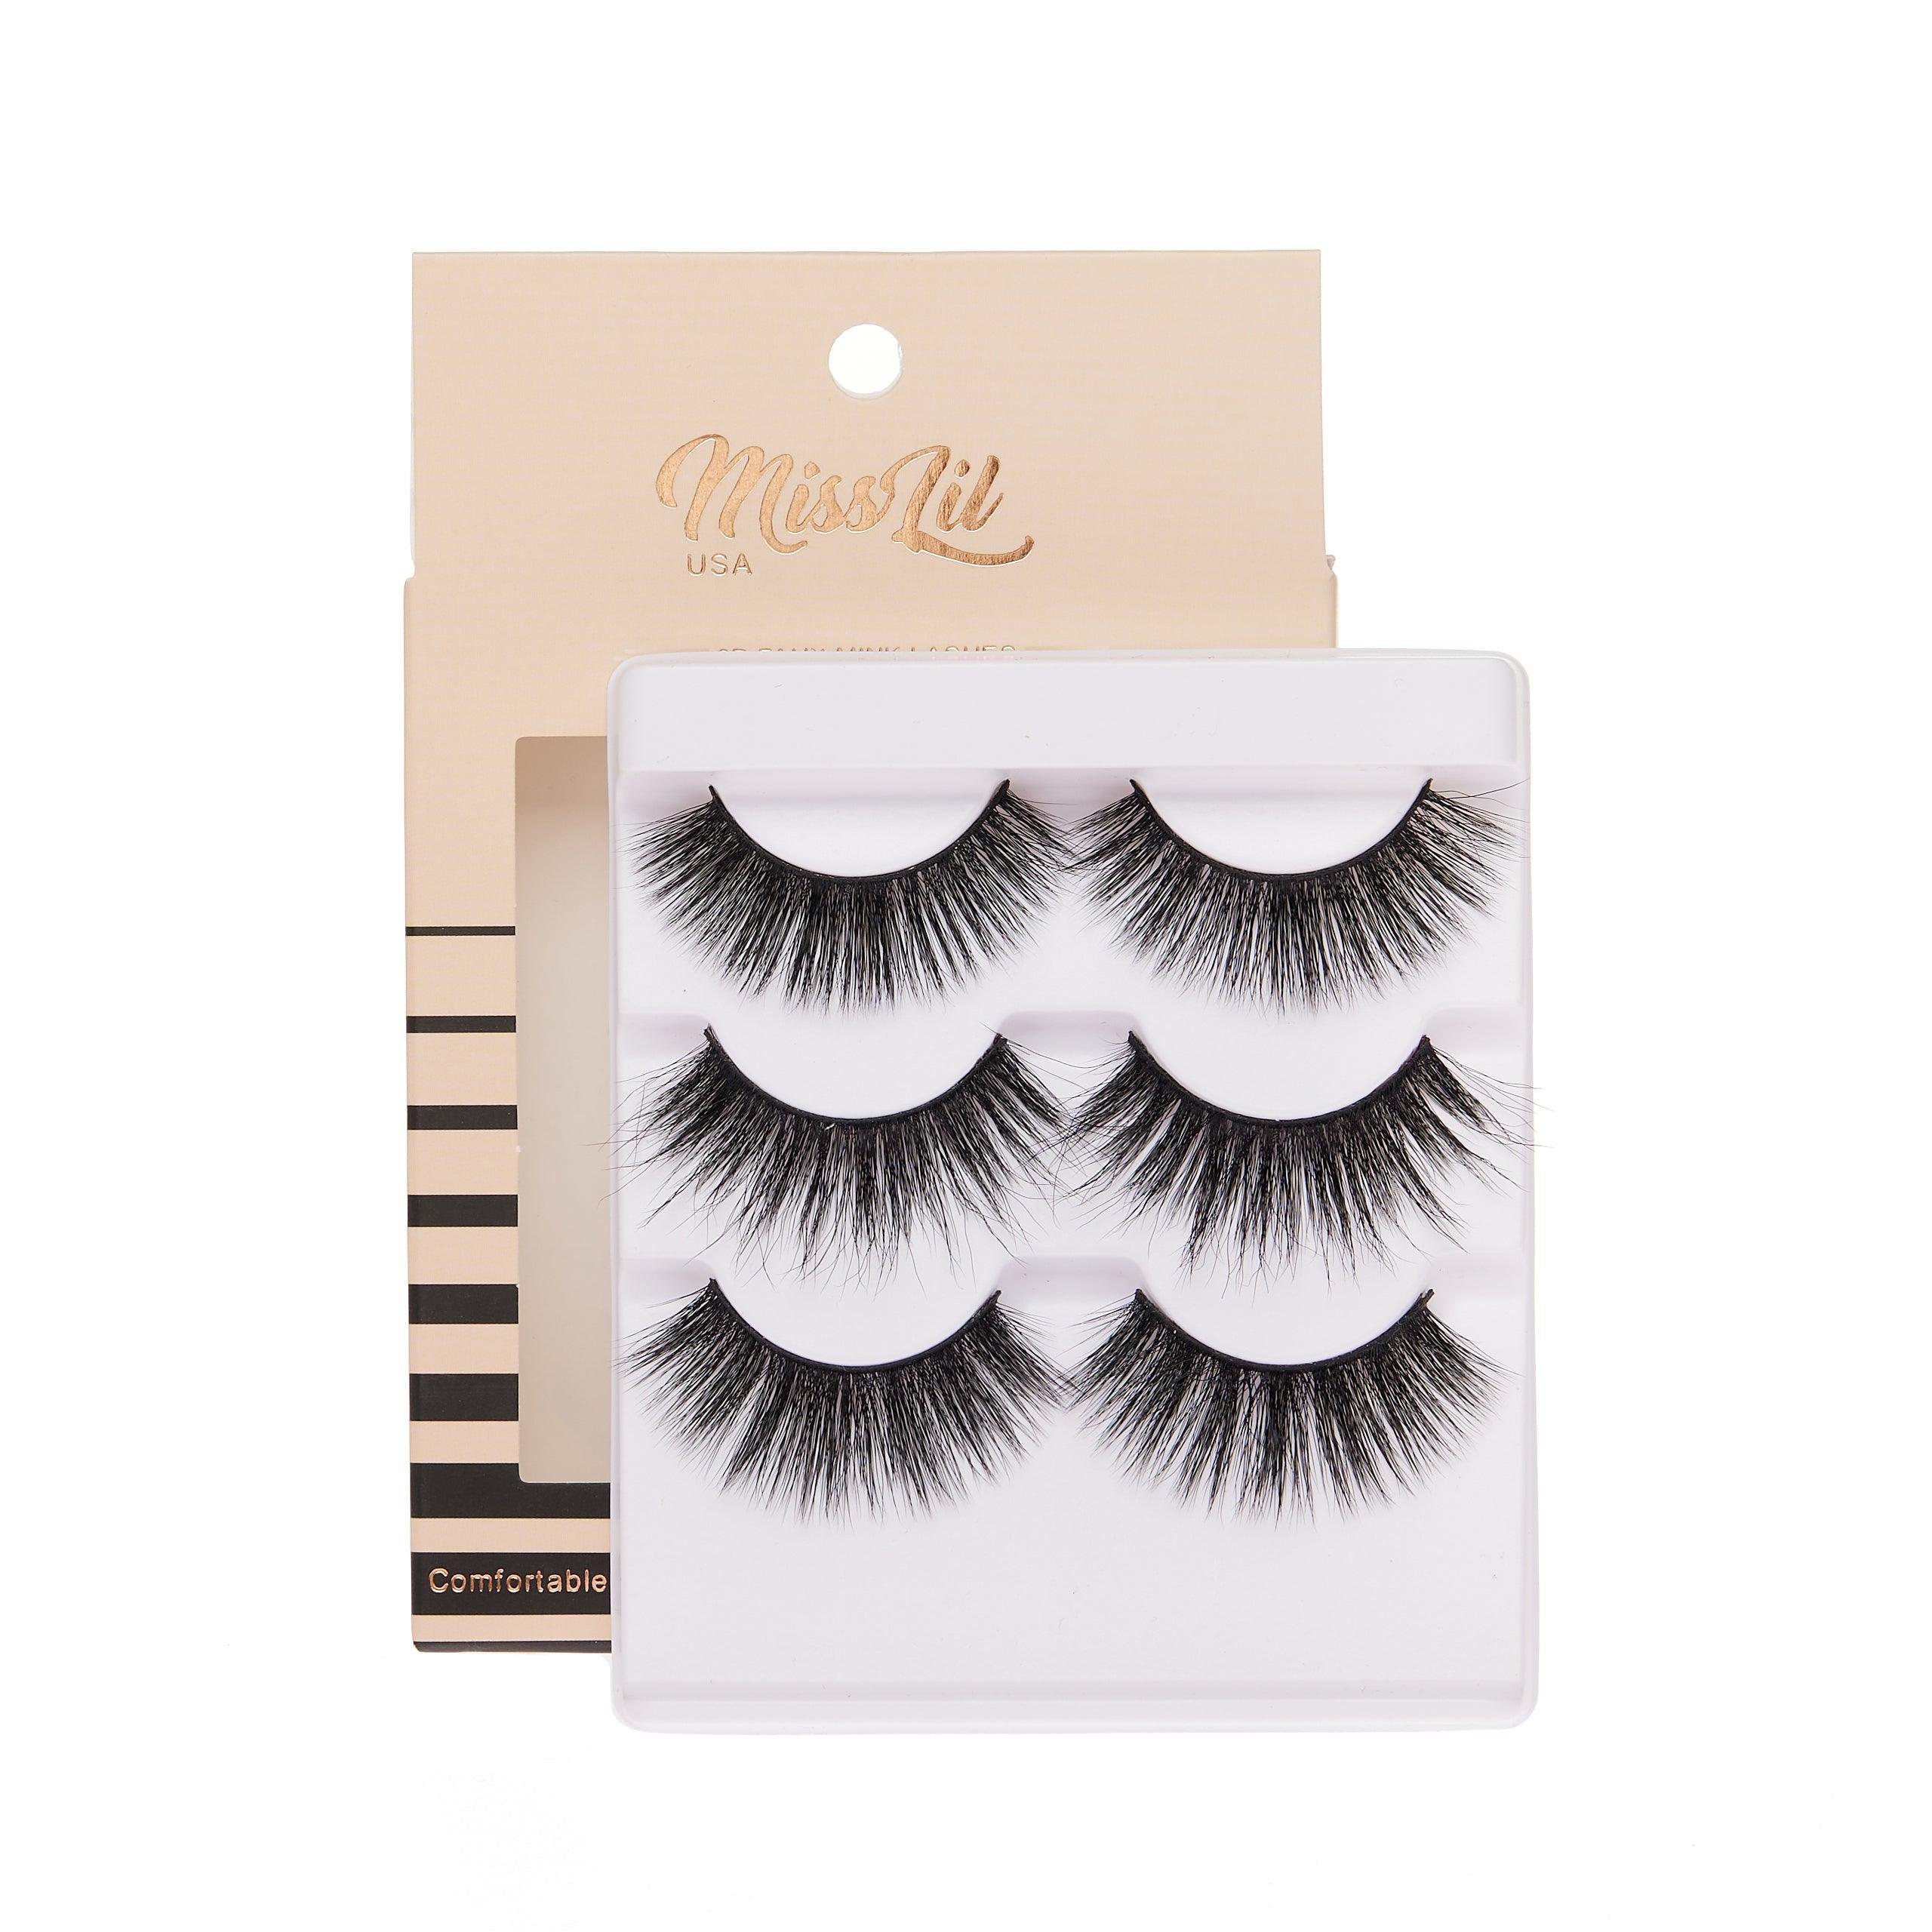 3-Pair Faux 9D Mink Eyelashes - Luxury Collection #19 - Pack of 12 - Miss Lil USA